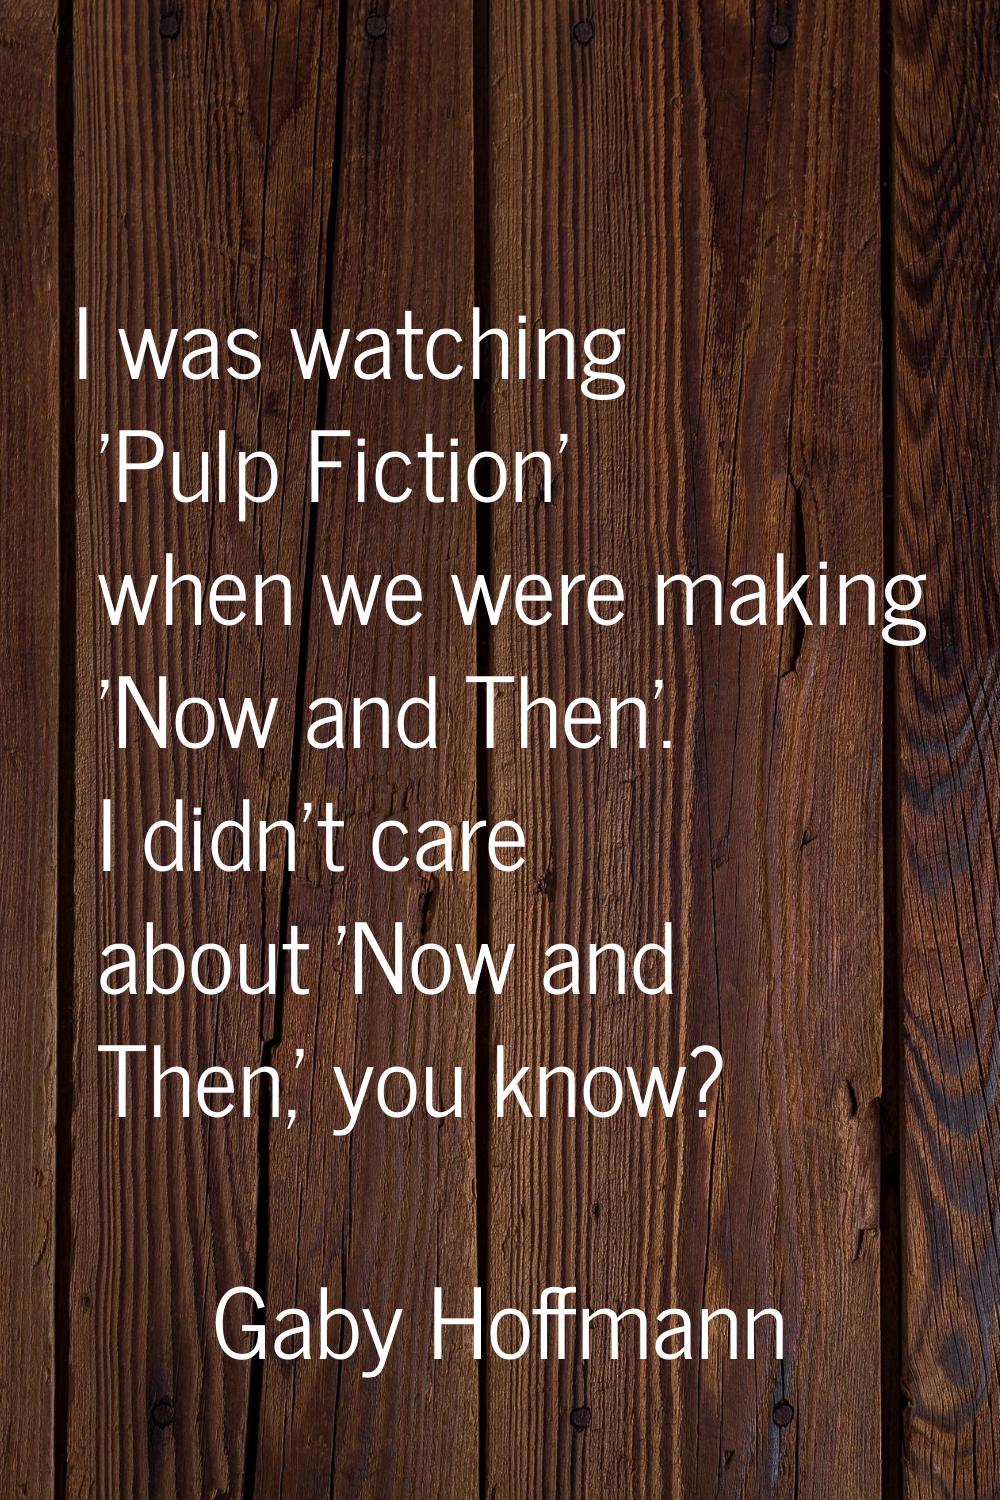 I was watching 'Pulp Fiction' when we were making 'Now and Then'. I didn't care about 'Now and Then